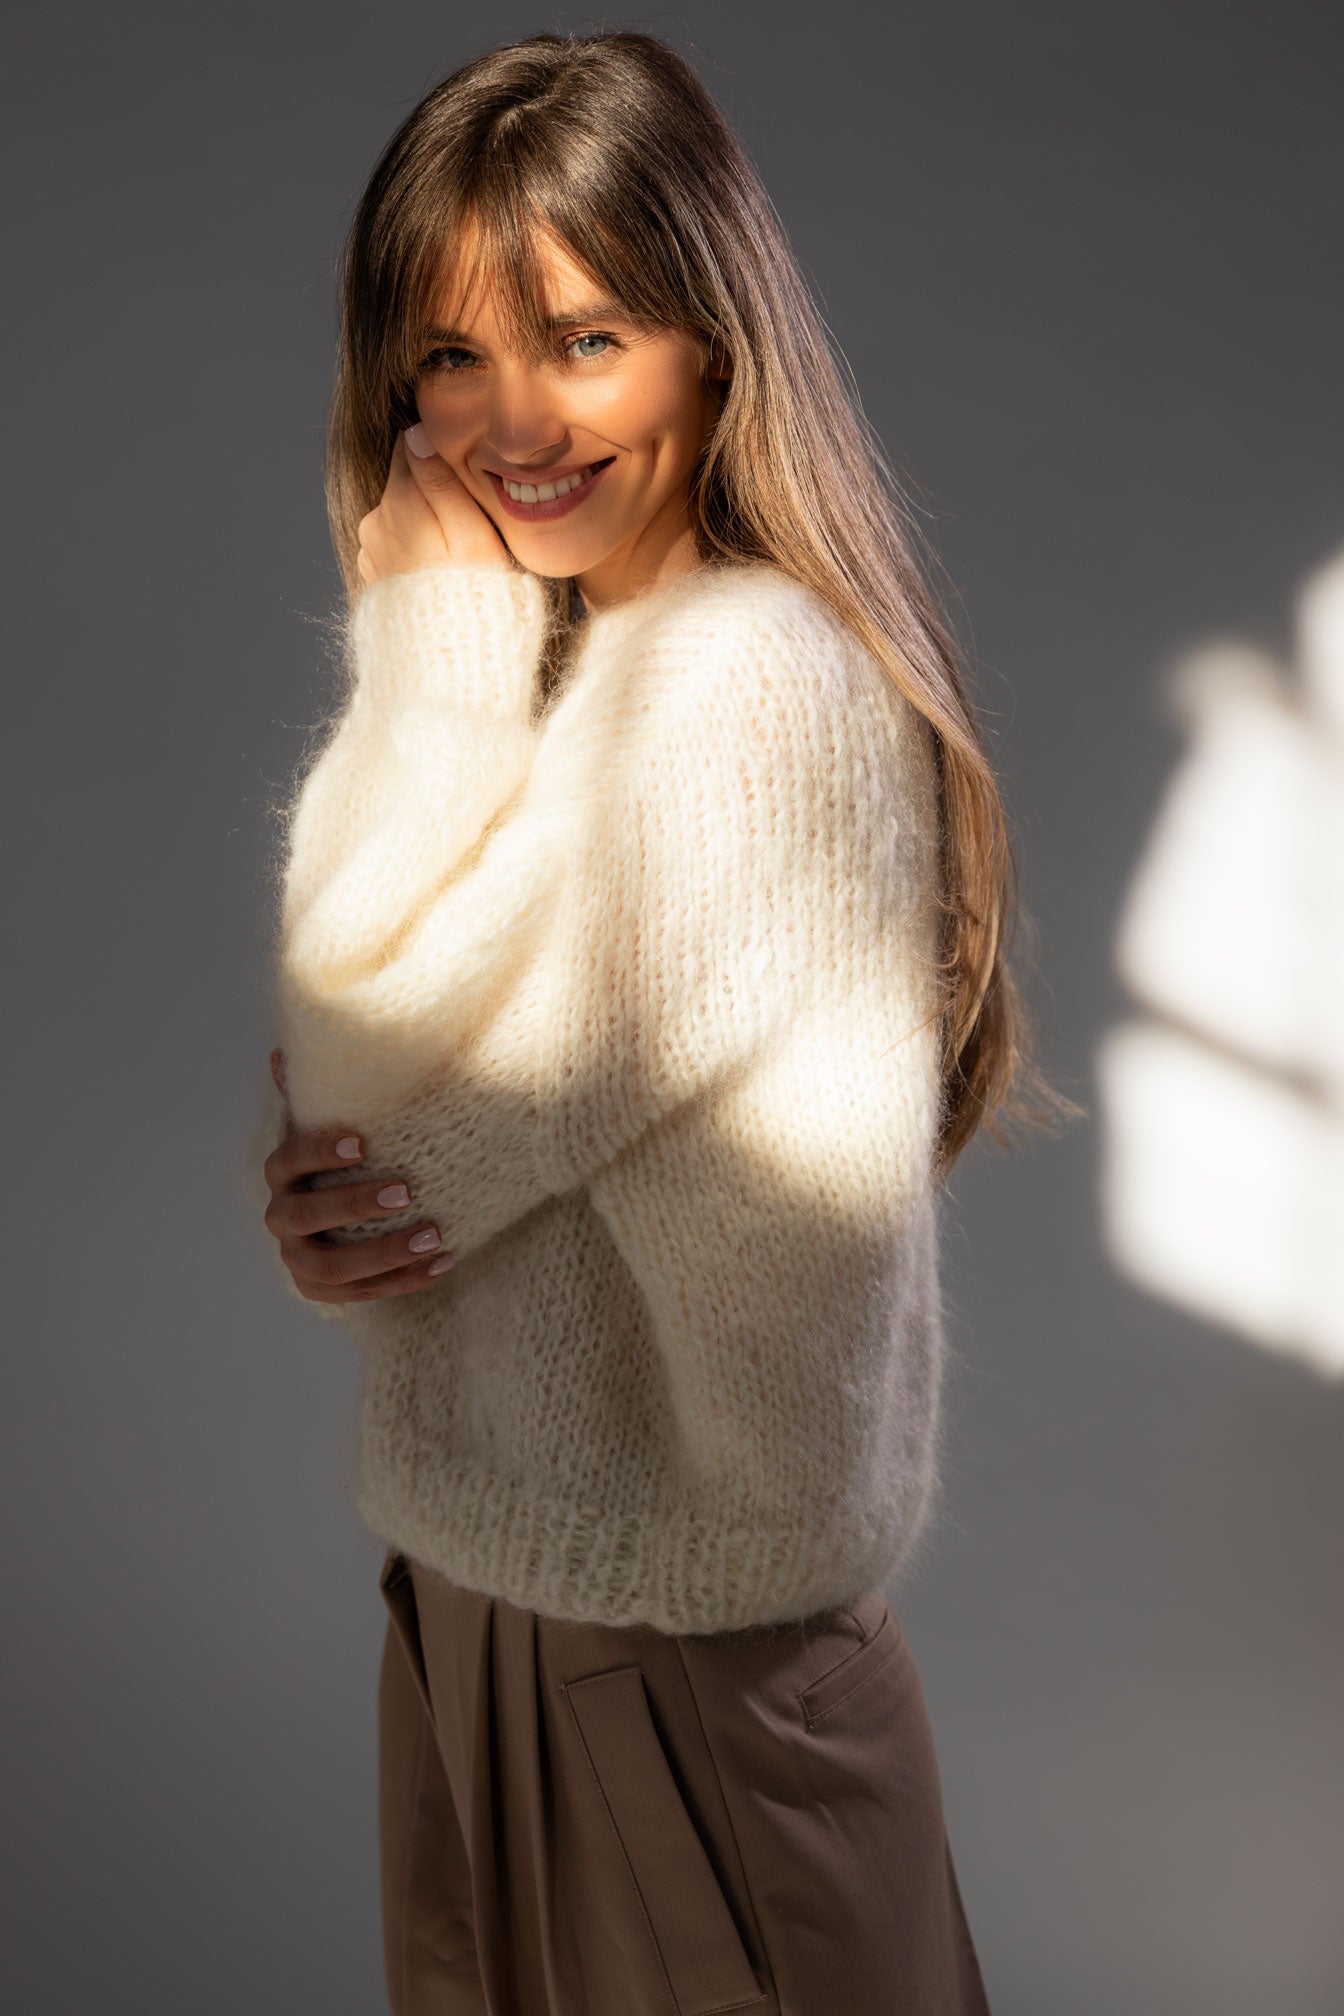 Ivory-White Mohair and Organic wool sweater, oversized fit and a boxy shape.